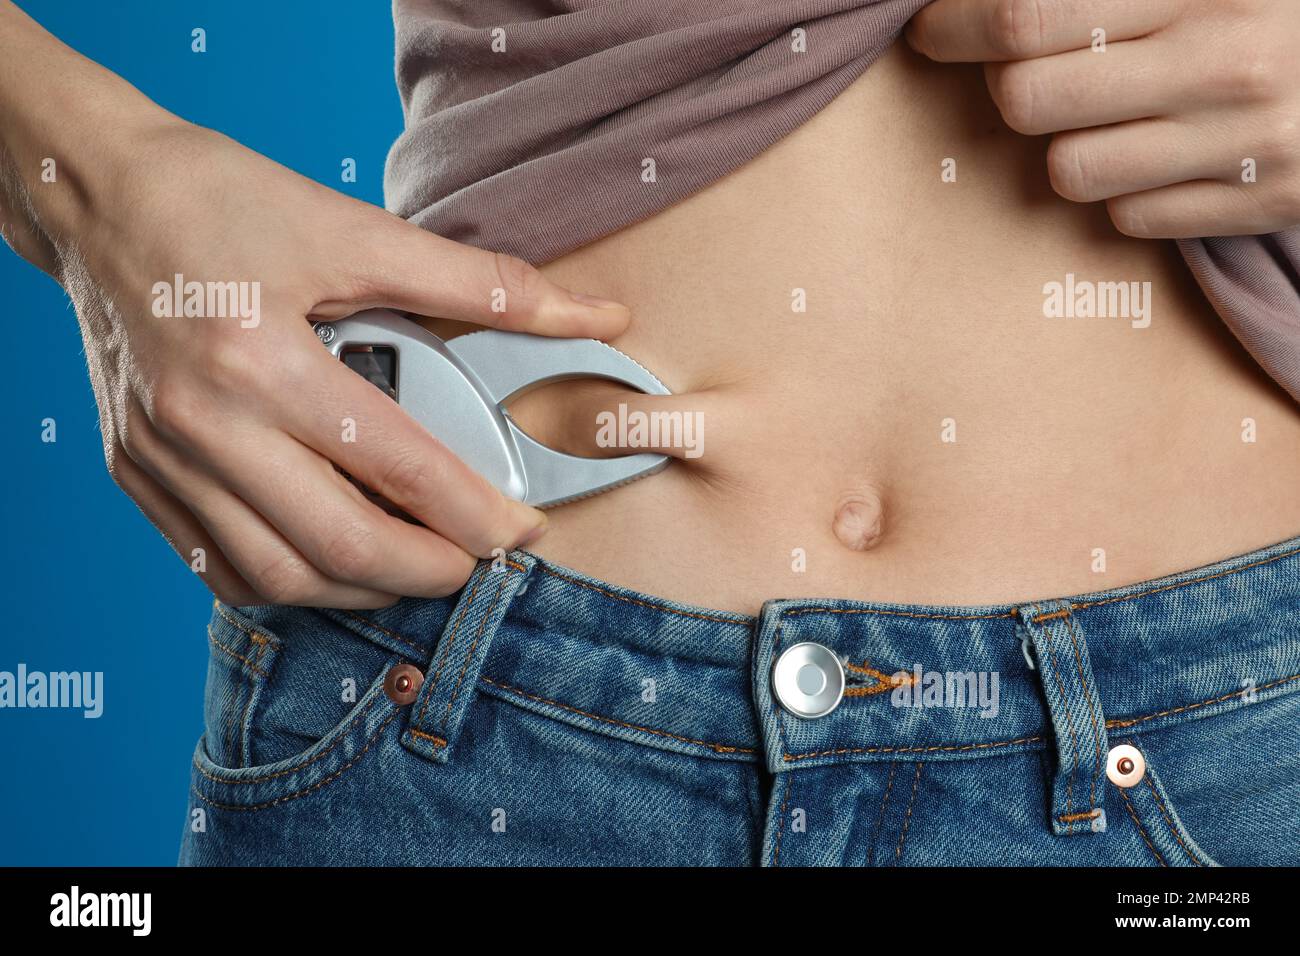 https://c8.alamy.com/comp/2MP42RB/young-woman-measuring-body-fat-with-caliper-on-blue-background-closeup-2MP42RB.jpg